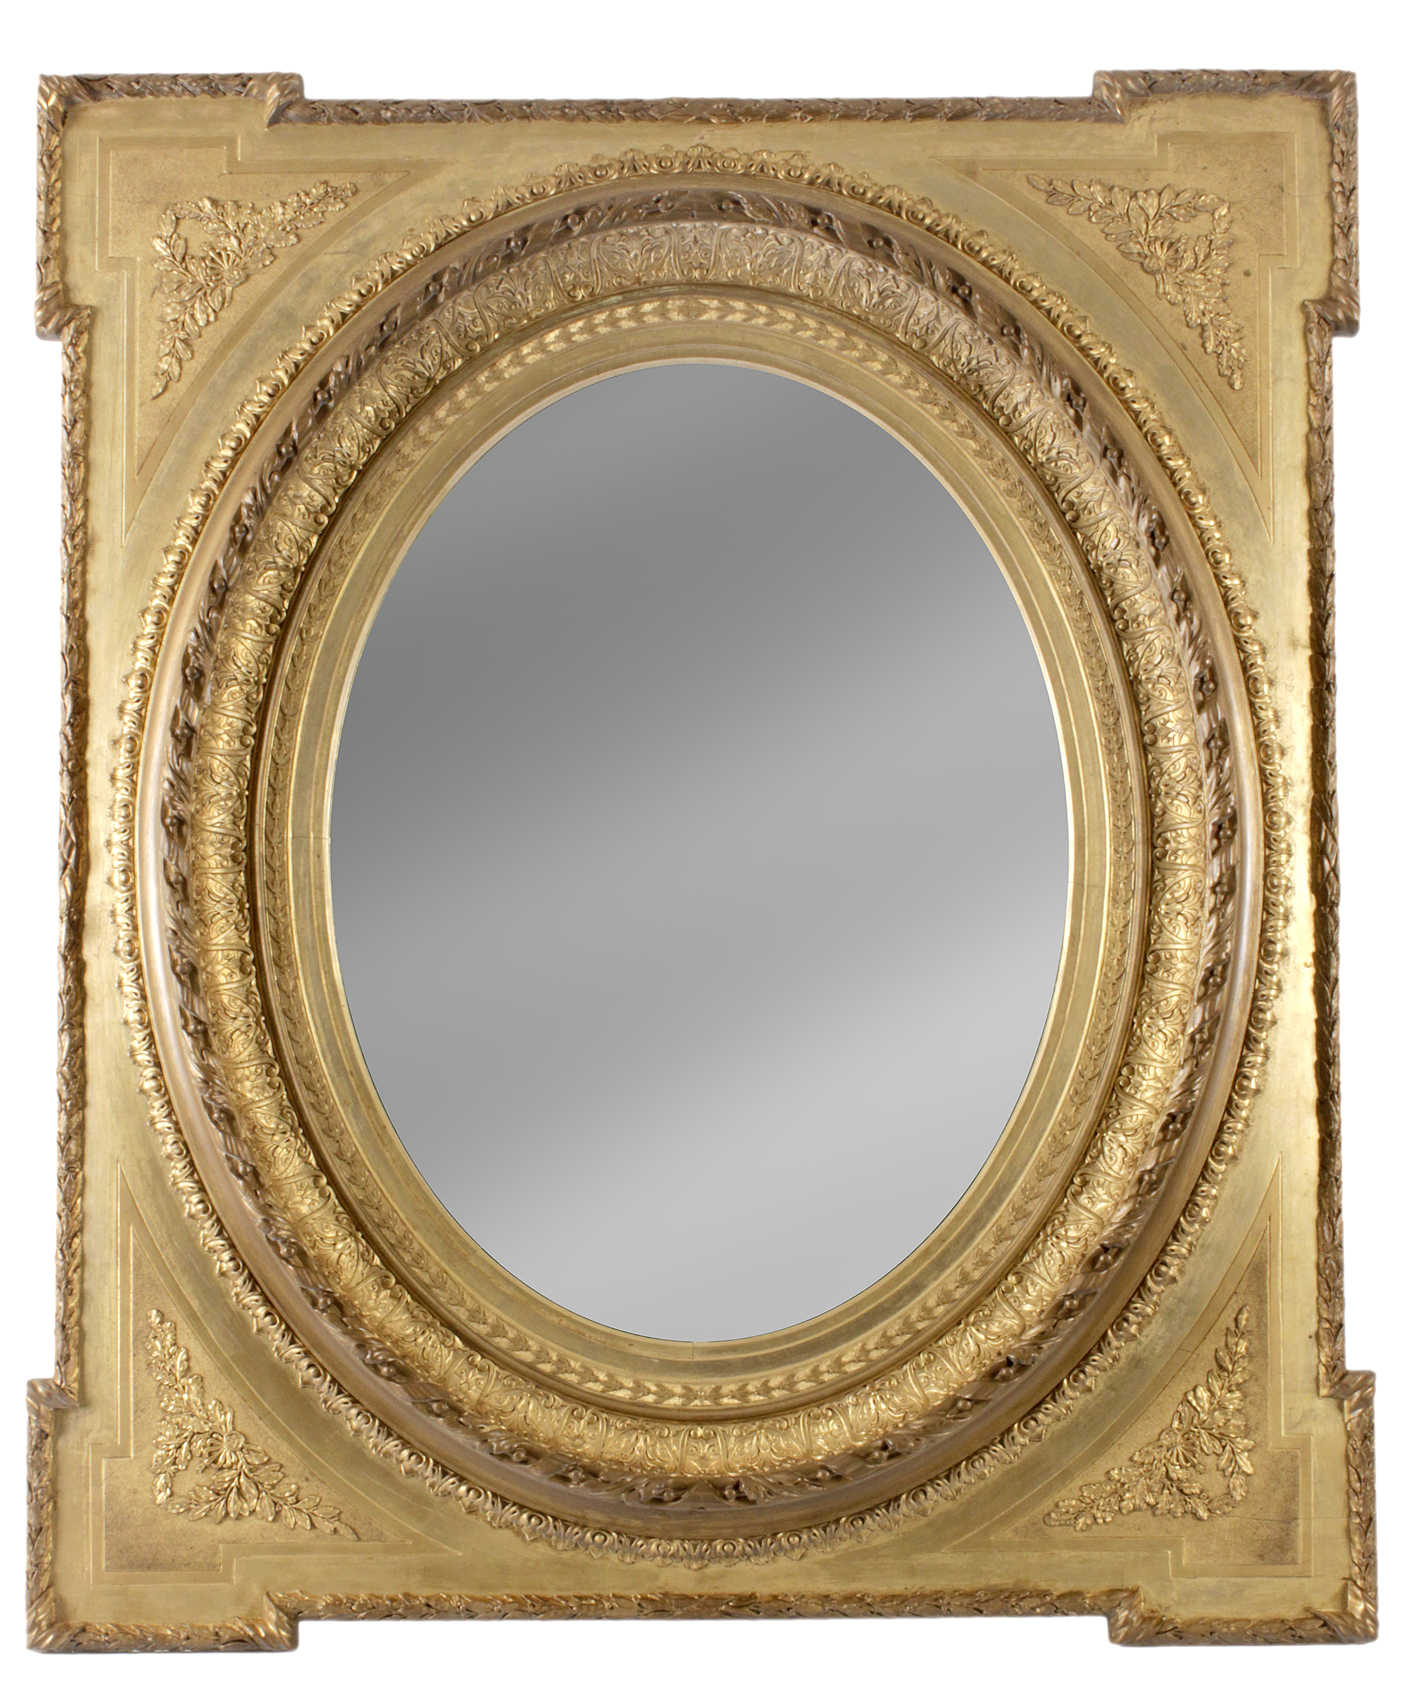 19th century Spanish Elizabethan perior mirror in carved and gilt wood and plaster